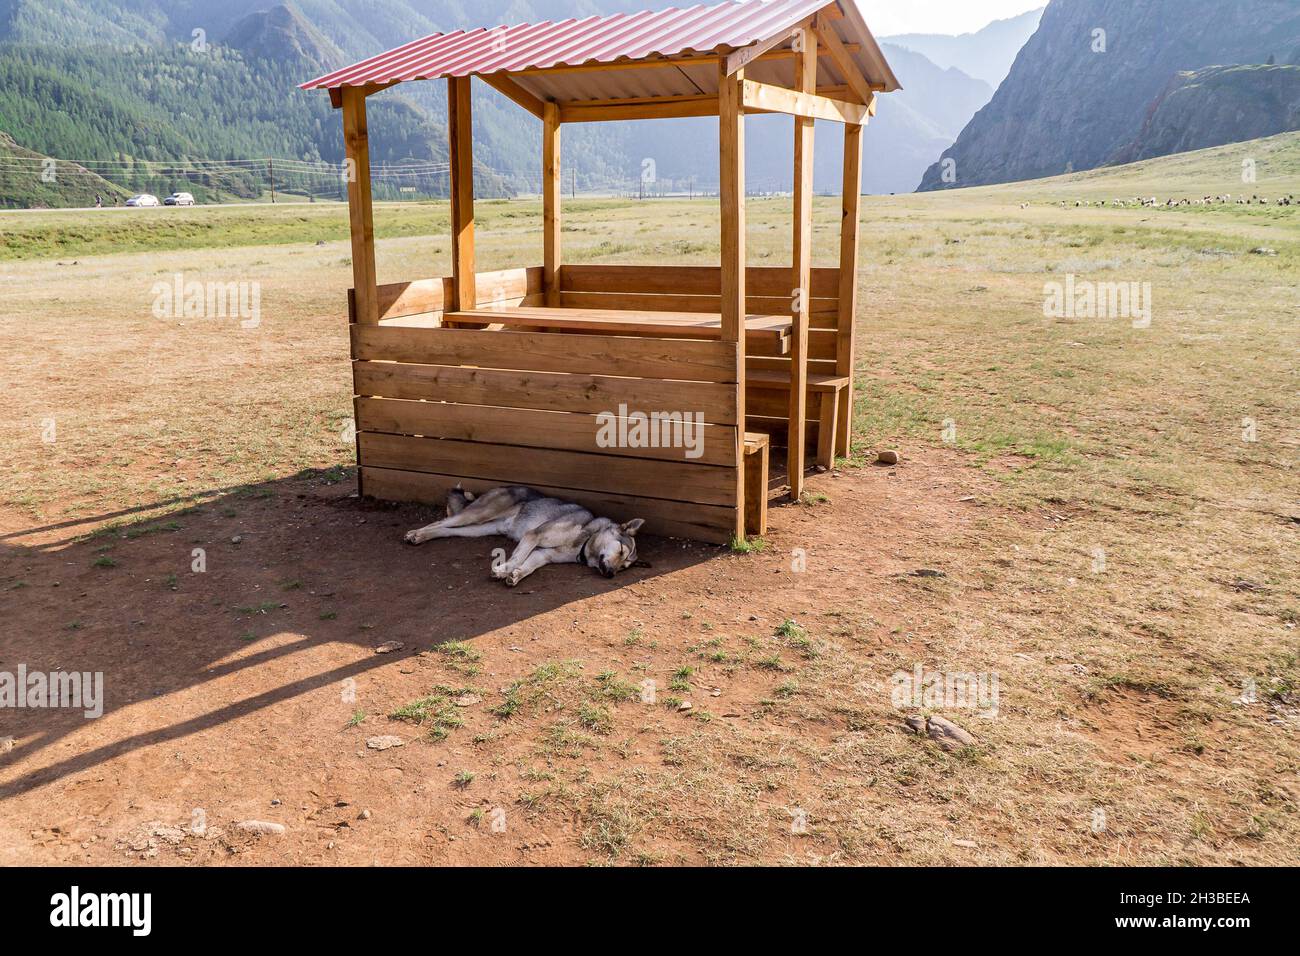 In the valley, between the mountains, the dog sleeps on the ground, hiding from the scorching sun in the shade of a gazebo. Stock Photo